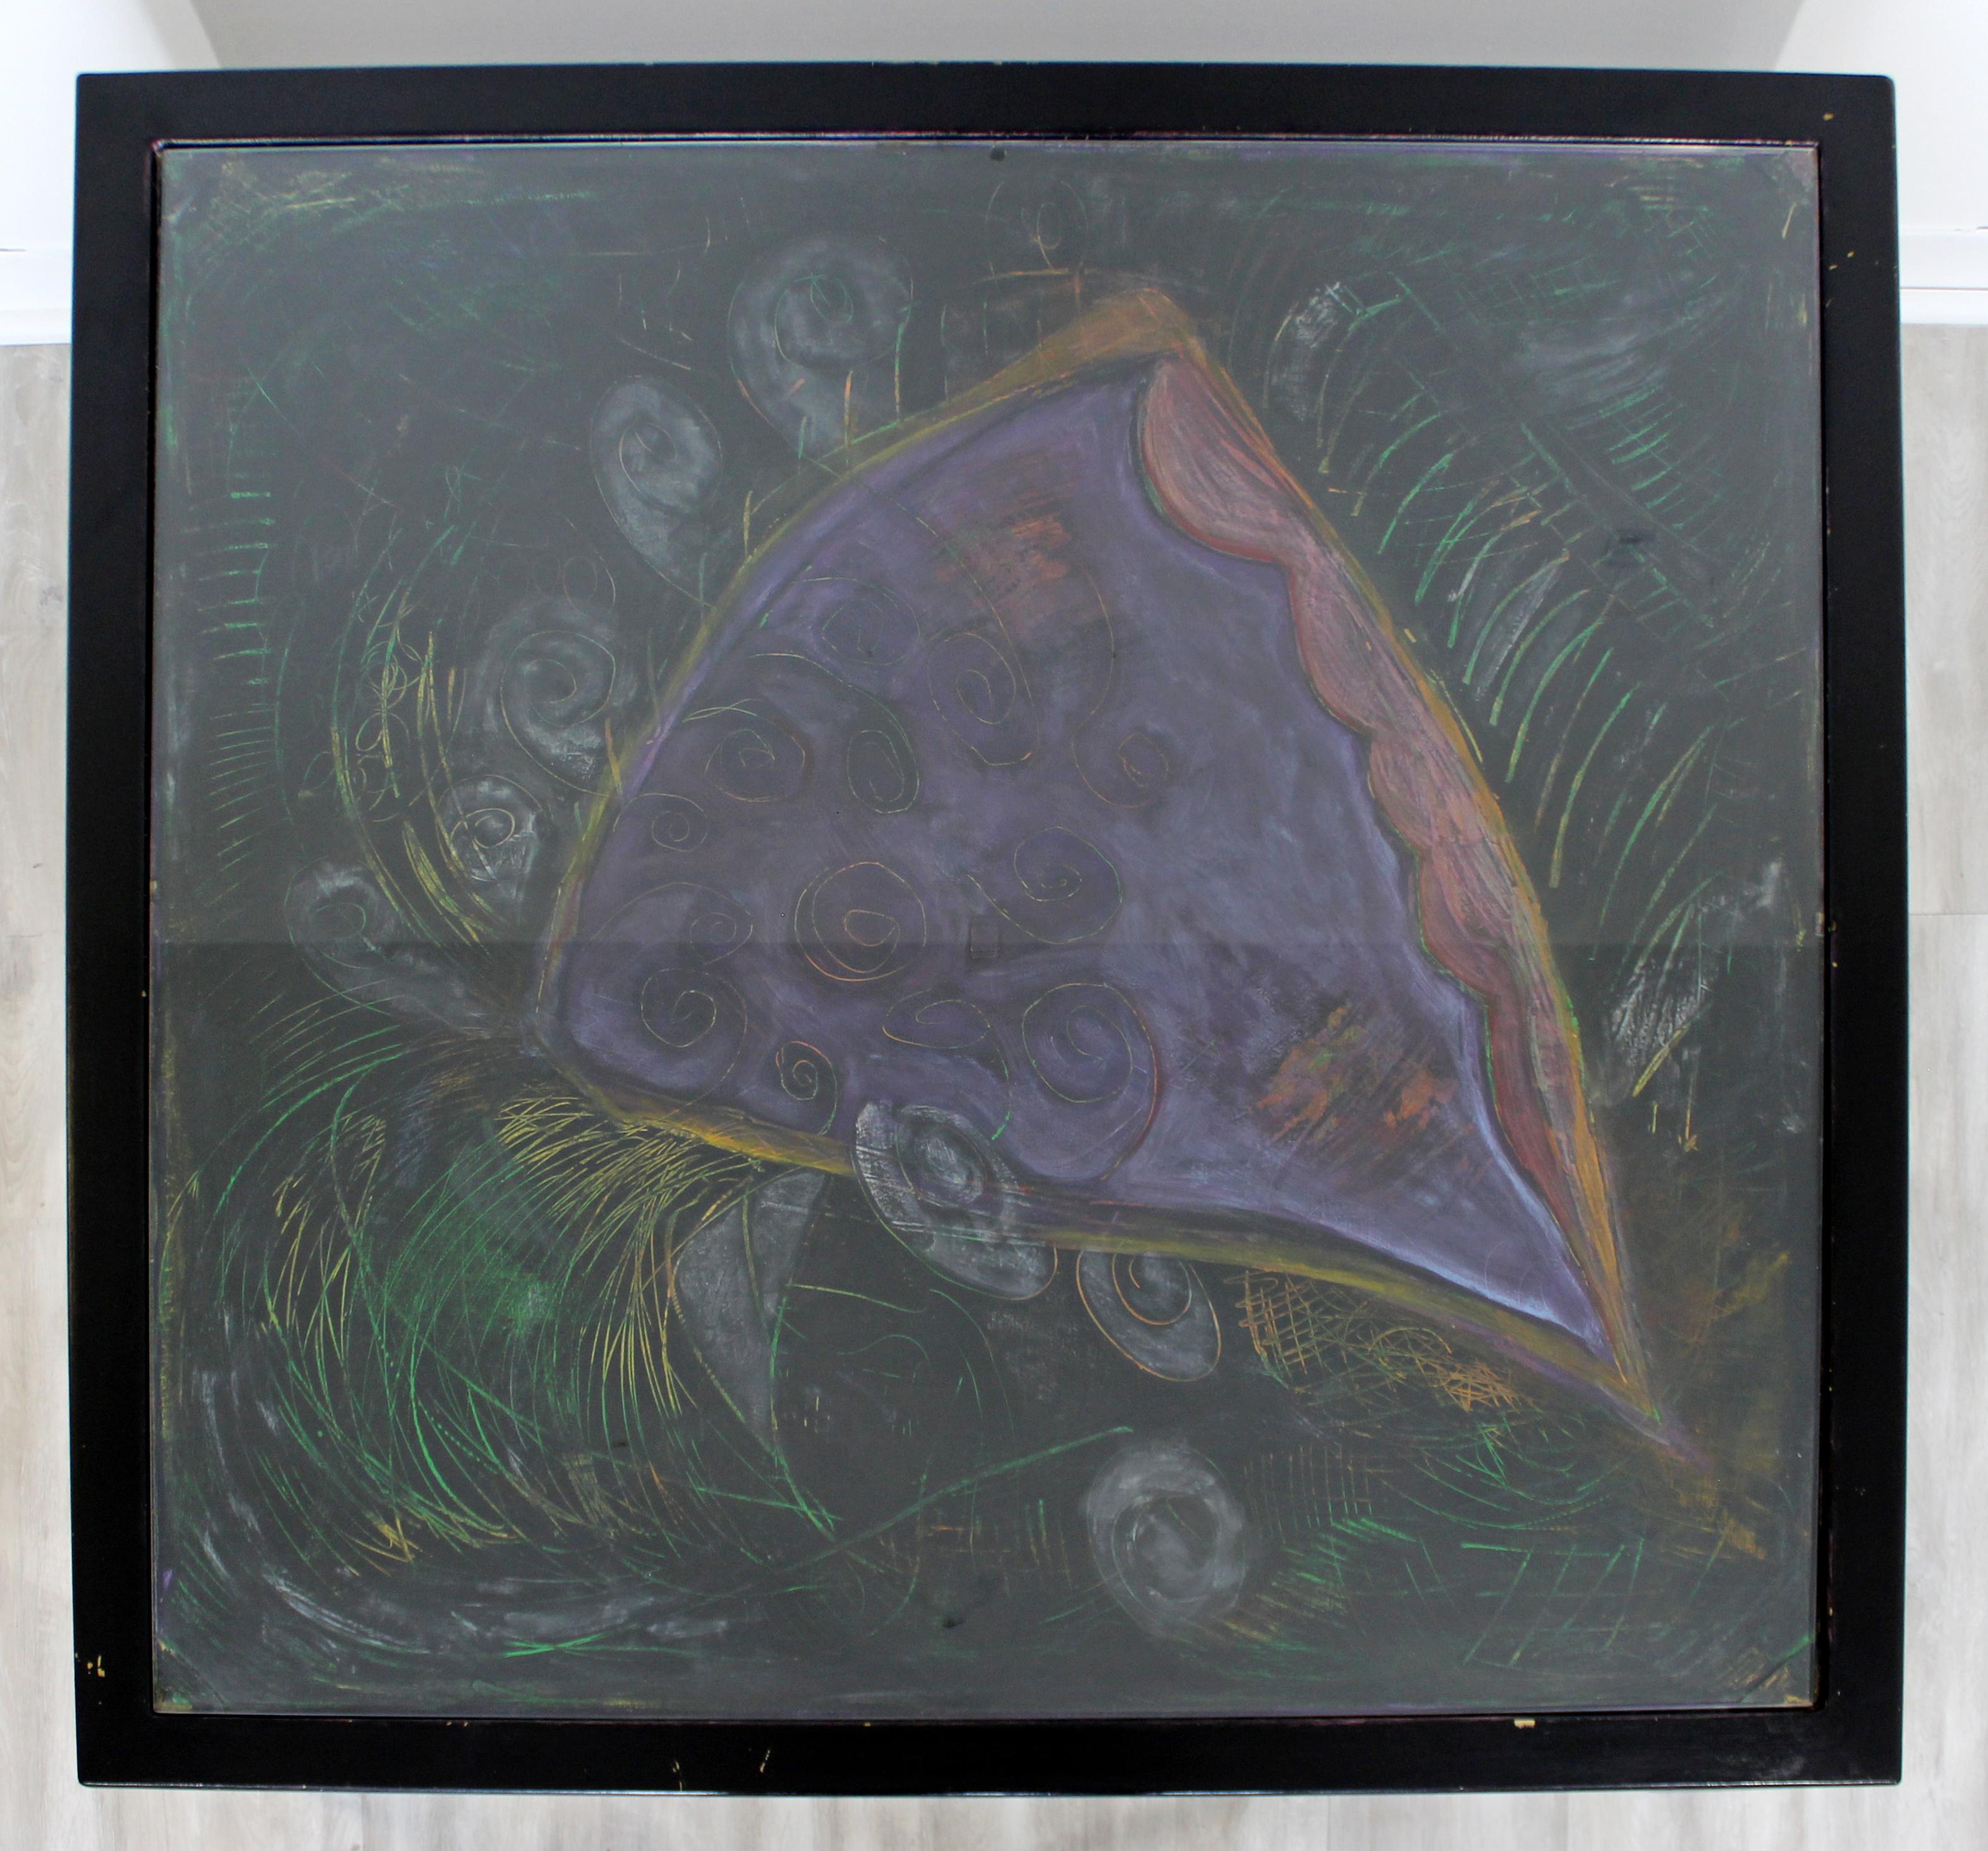 20th Century Contemporary Large Square Black Pastel & Glass Coffee Table Artist Lois Teicher